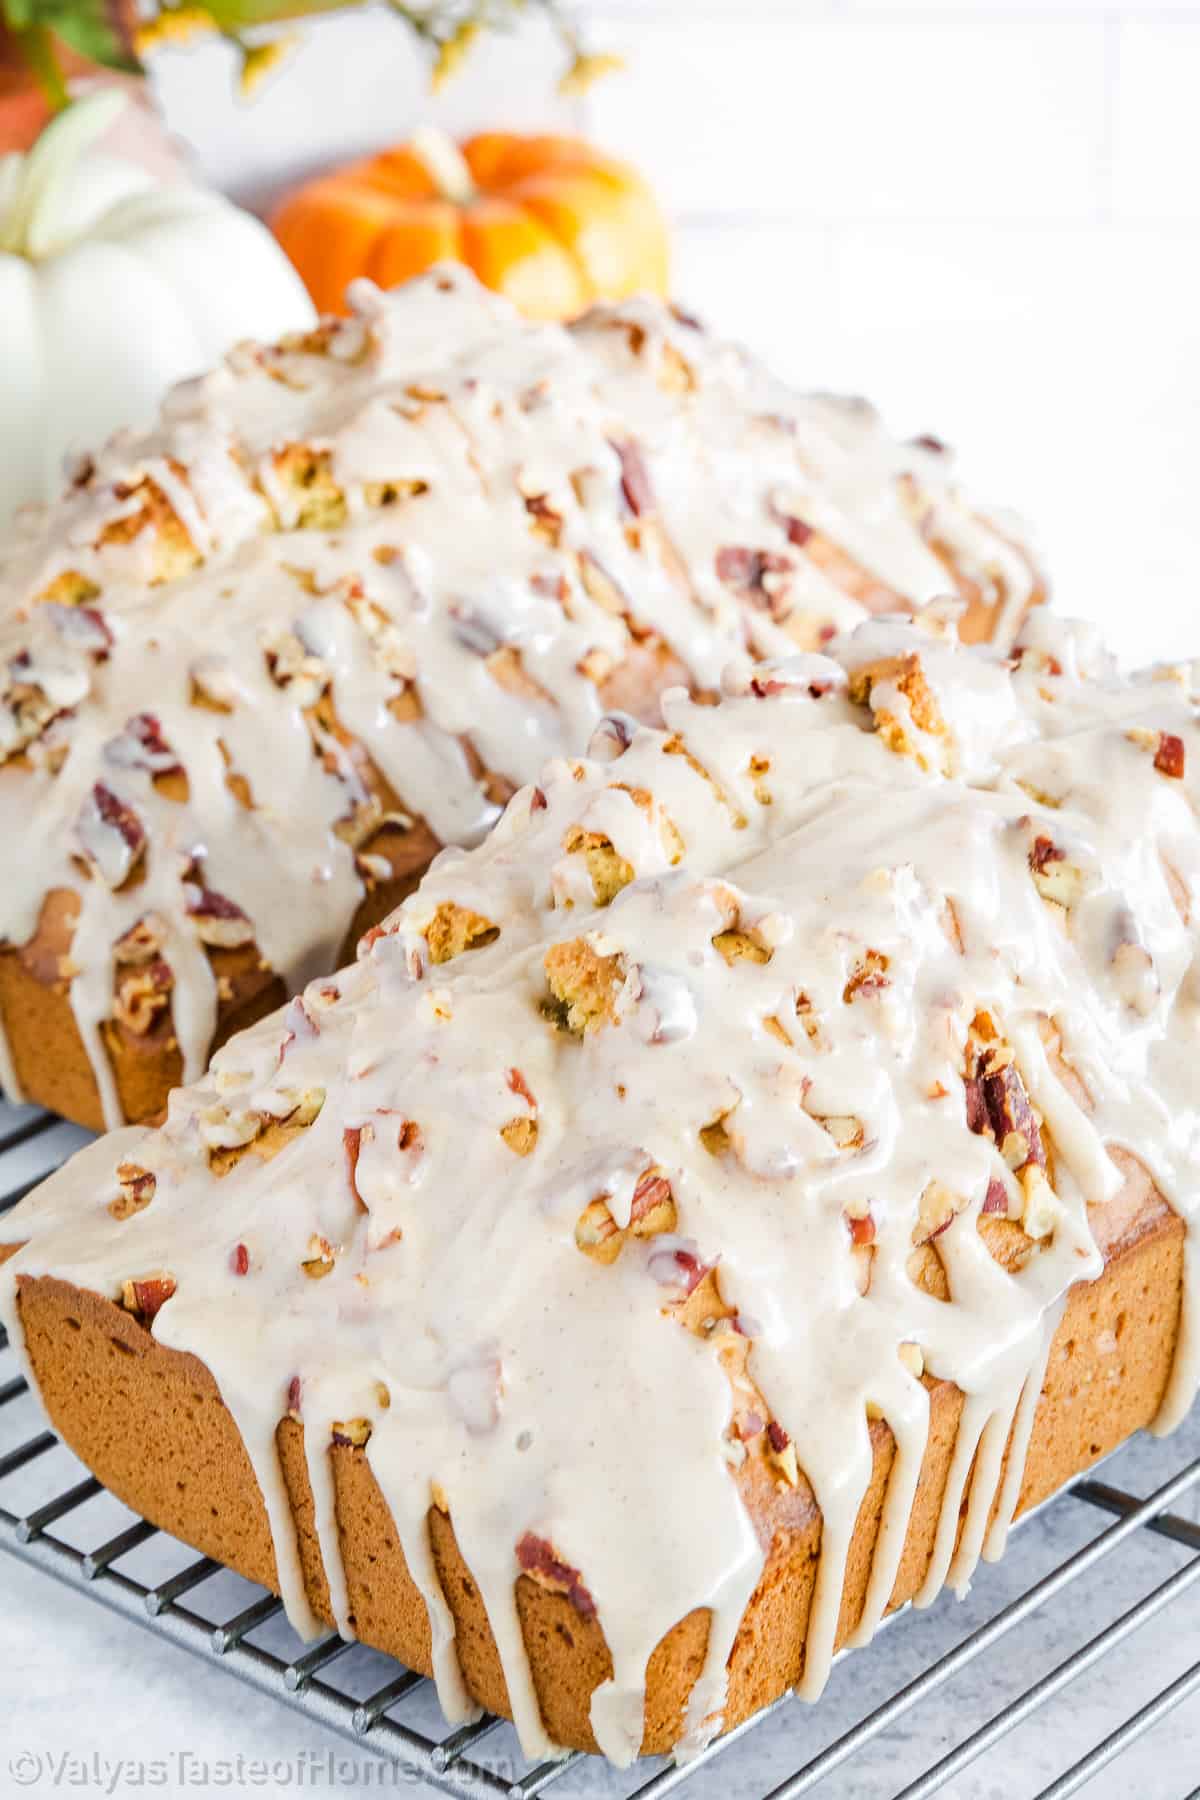 This Pumpkin Pecan Bread will give you a deliciously moist bread that has a crunchy crust, with a sprinkling of toasted pecans on top. 